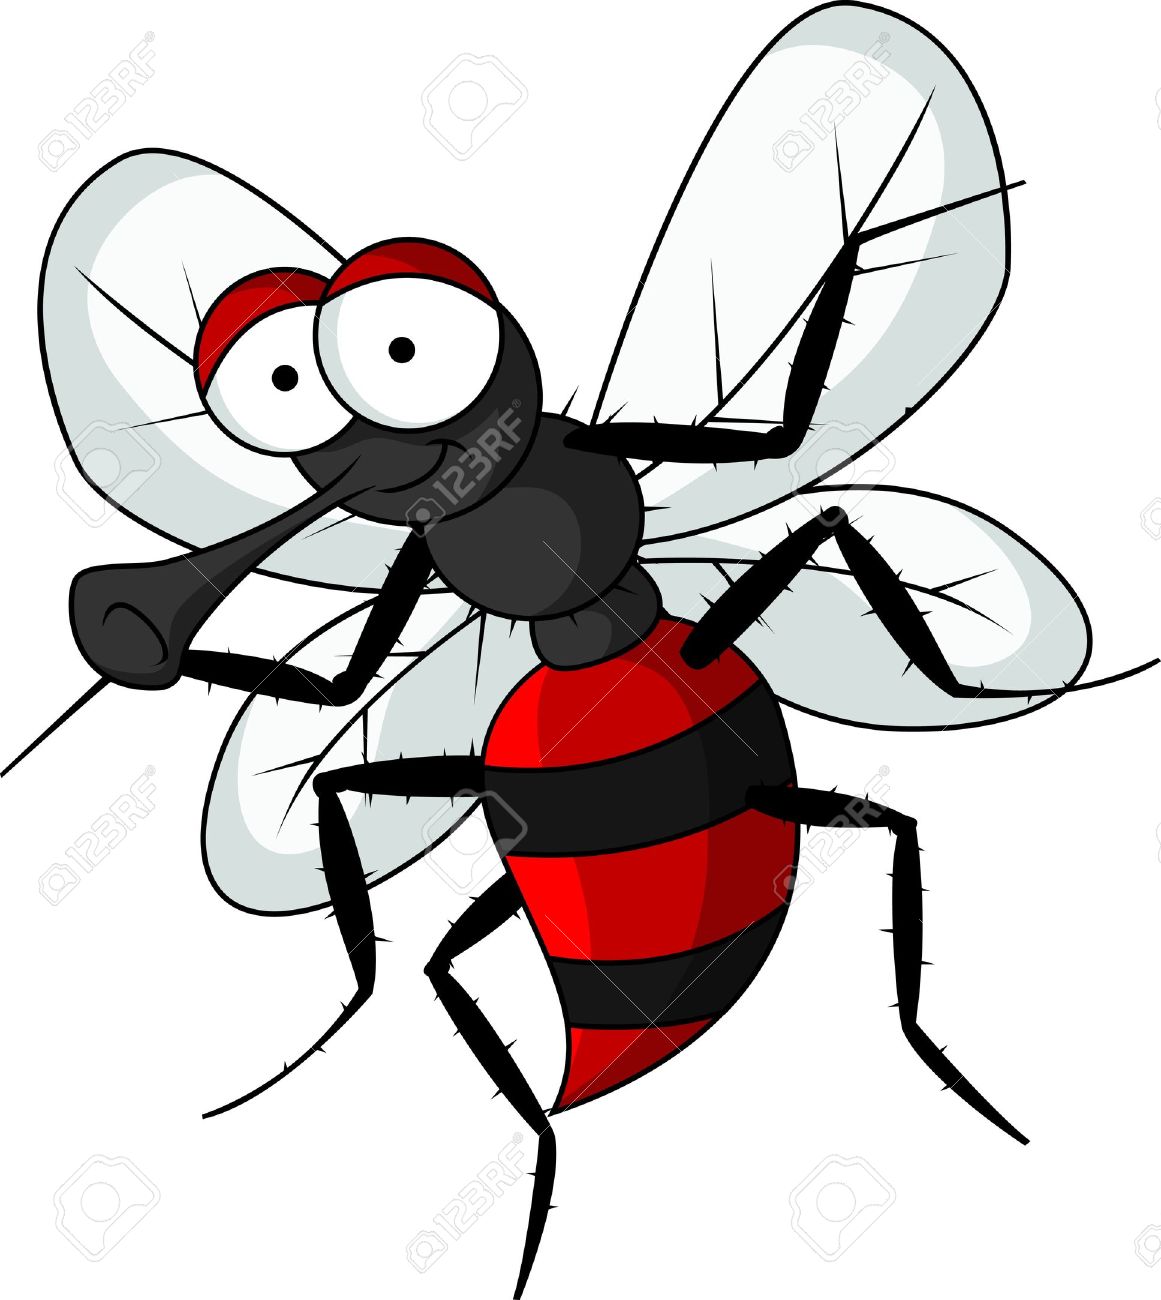 Mosquito clipart malaria mosquito. Free download best 